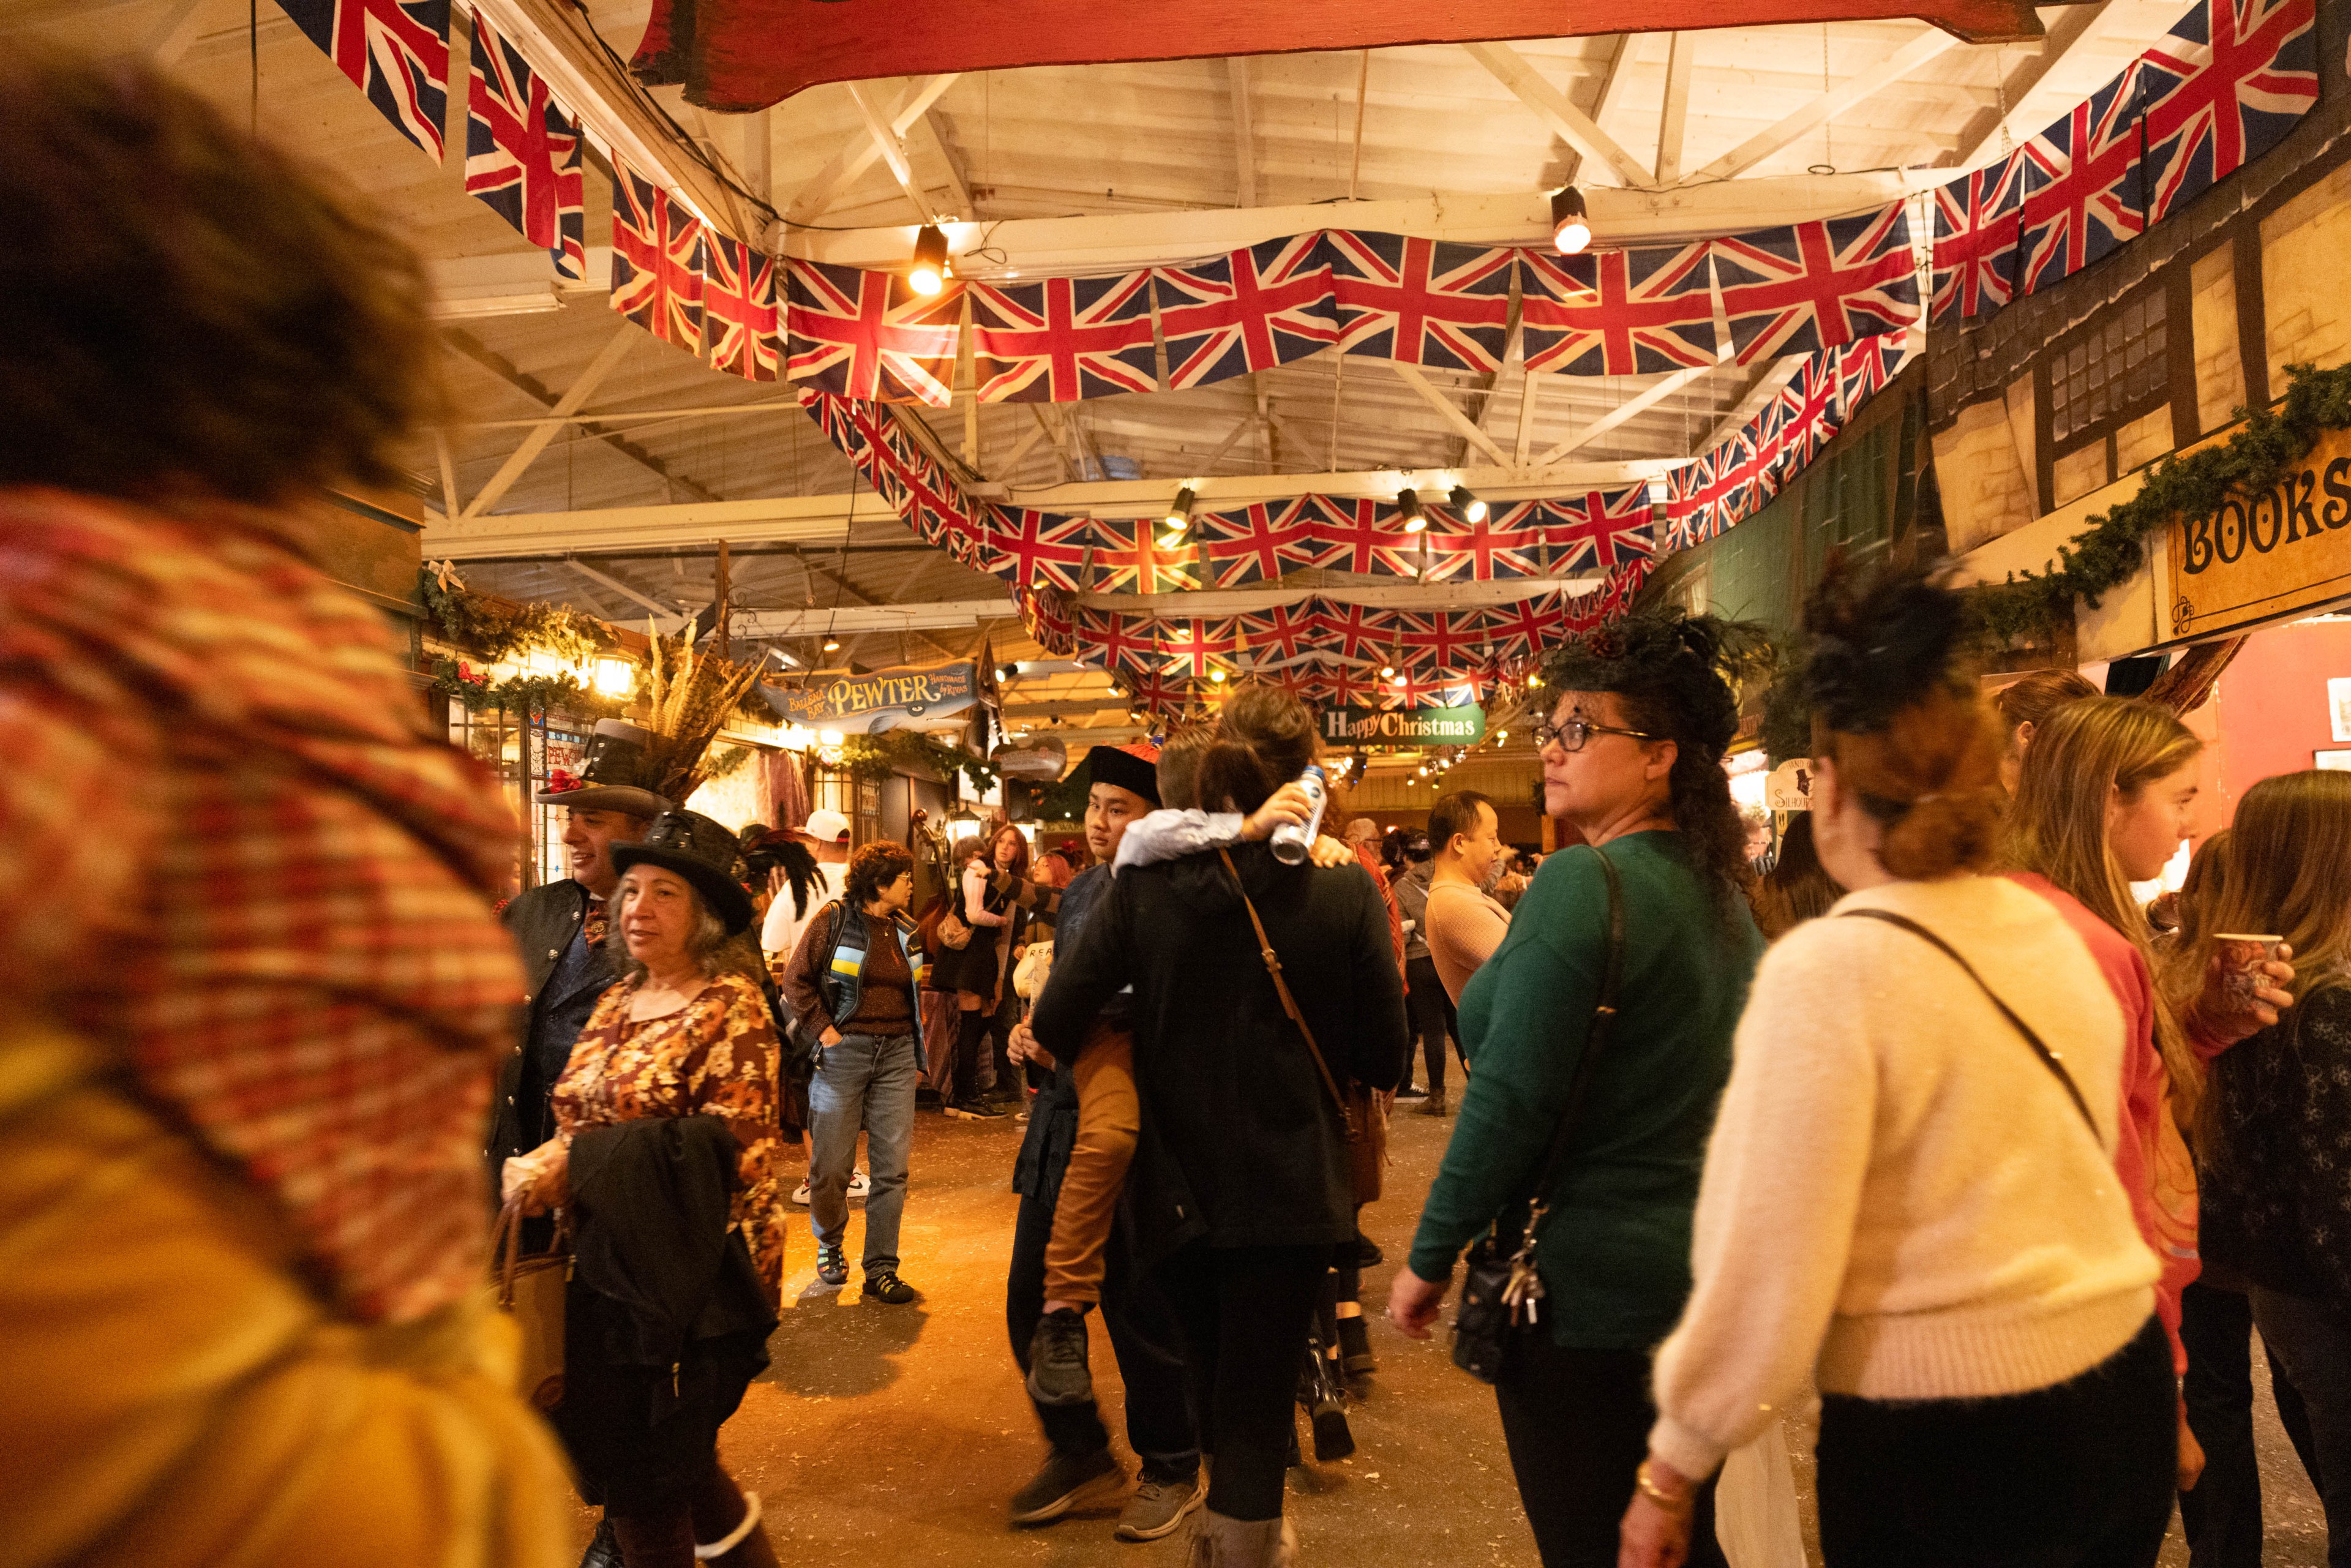 Patrons walks through the main concourse at the Great Dickens Fair.